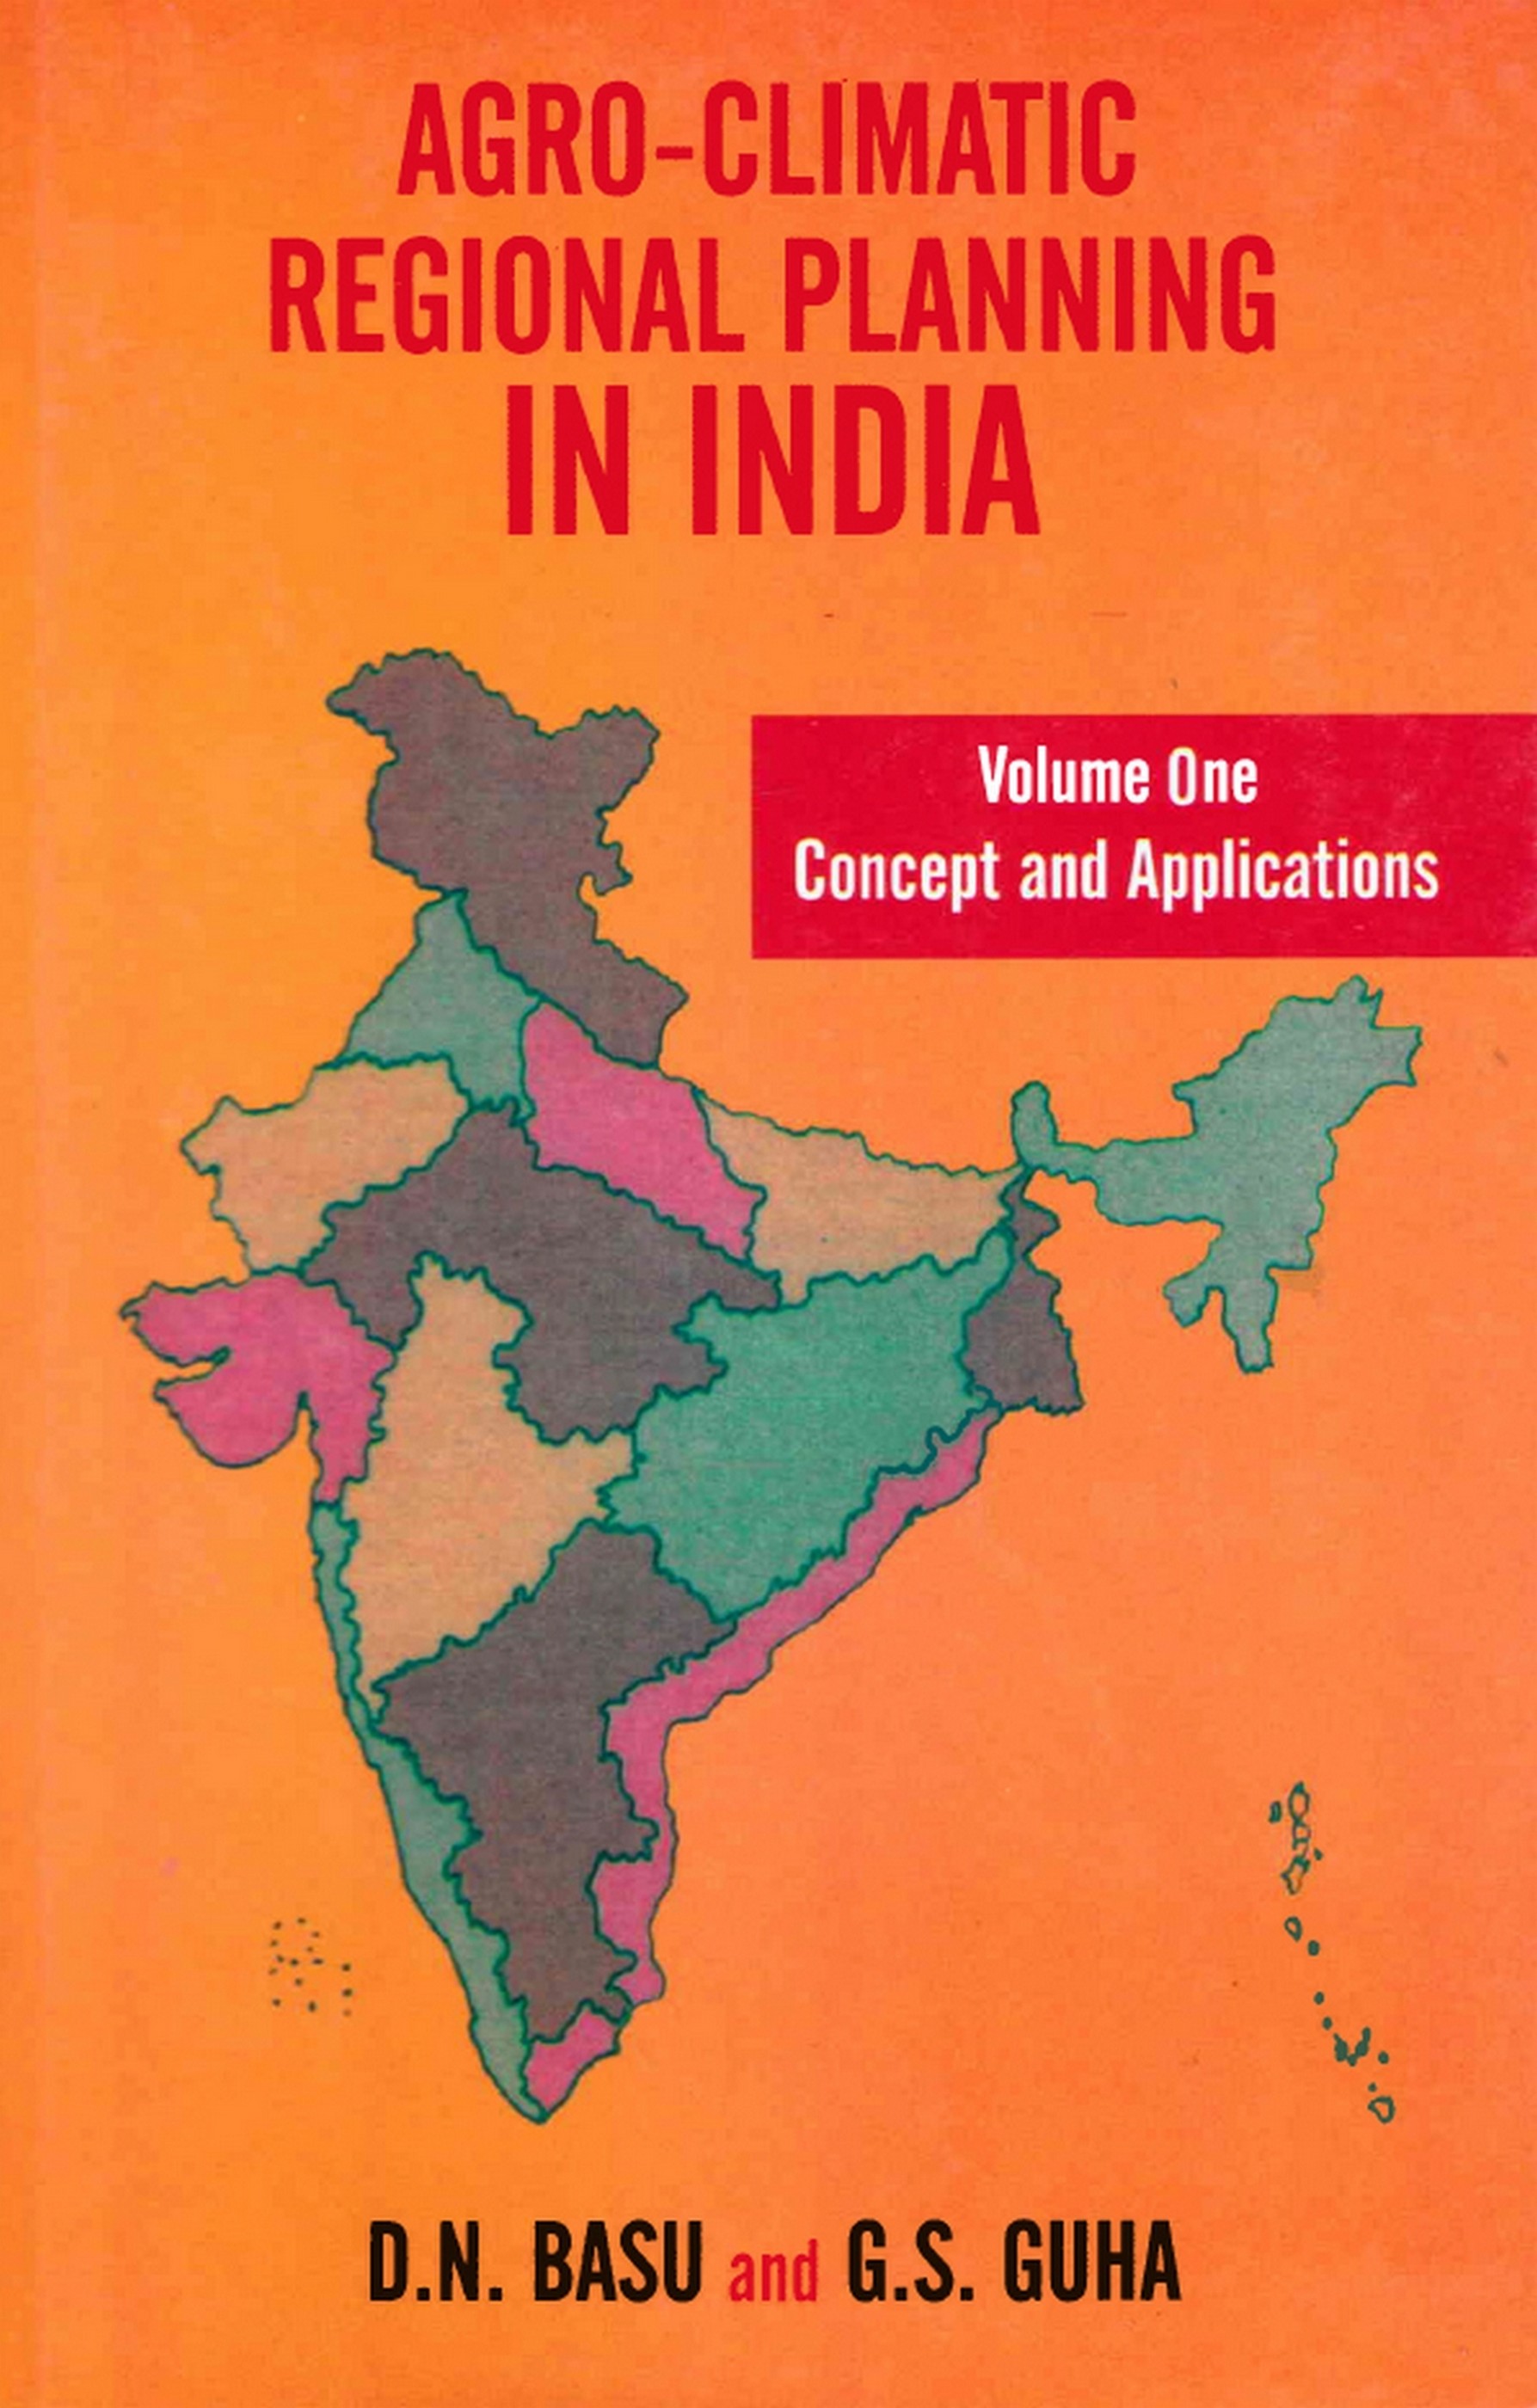 Agro-Climatic Regional Planning in India Volume-1